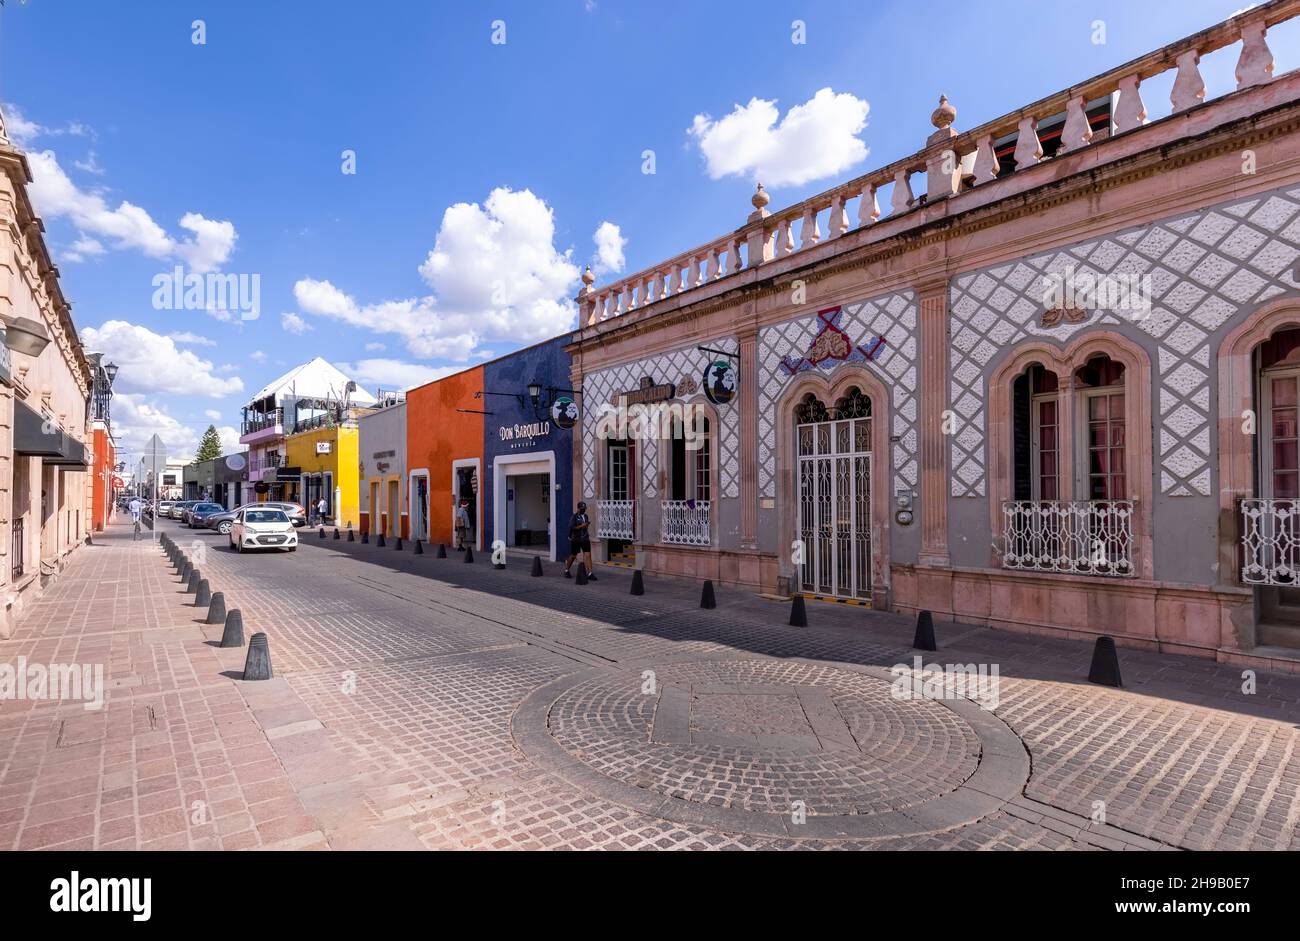 Aguascalientes, Mexico, 20 September, 2021: Central Mexico, Aguascalientes colorful streets and colonial houses in historic city center, one of the main city tourist attractions Stock Photo